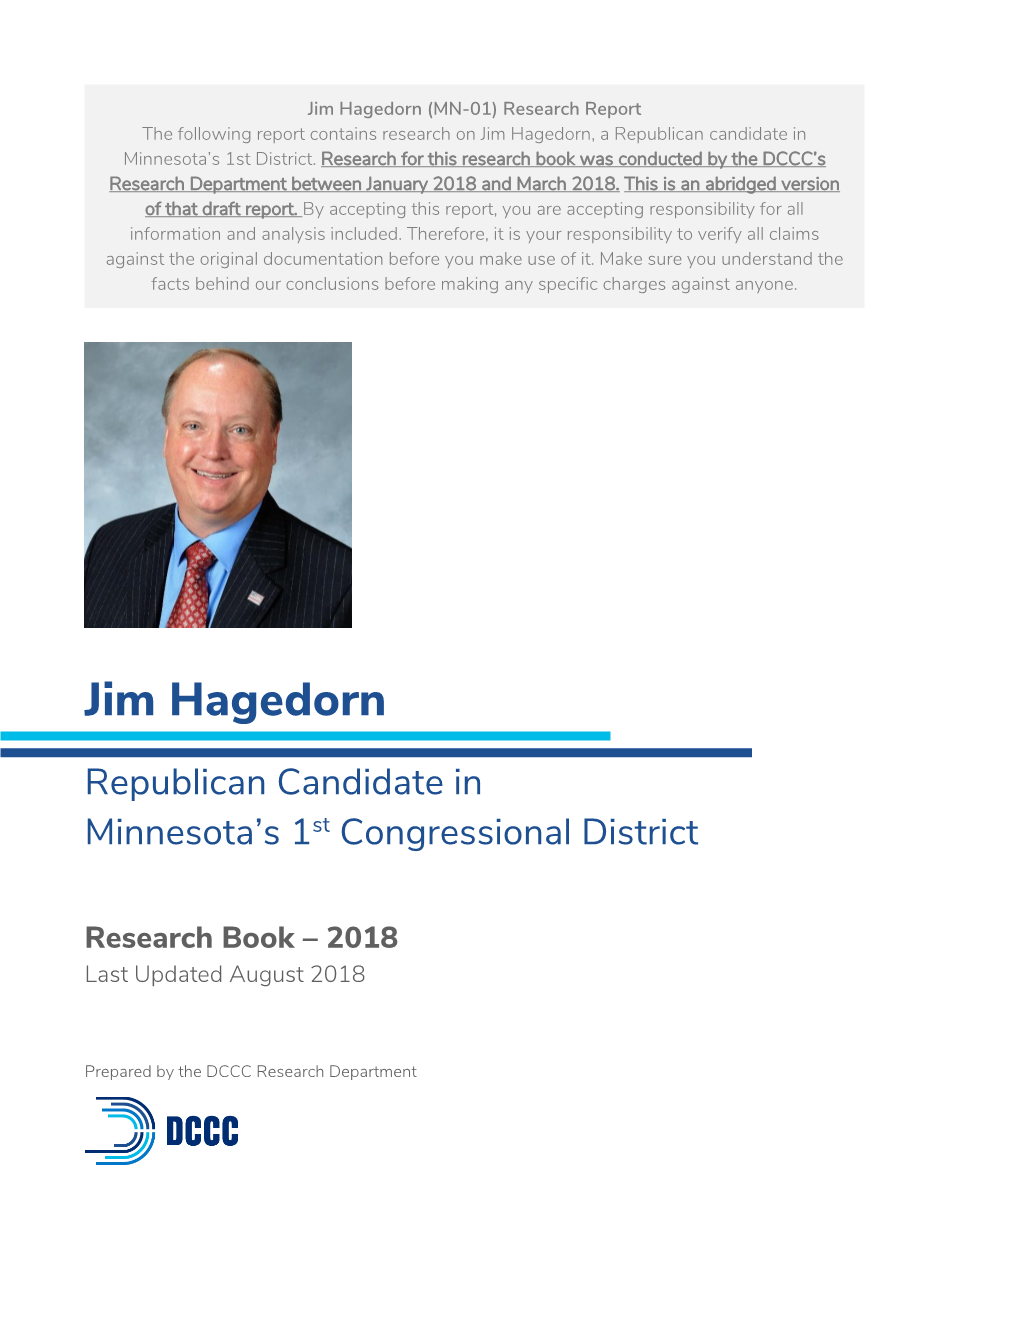 Jim Hagedorn (MN-01) Research Report the Following Report Contains Research on Jim Hagedorn, a Republican Candidate in Minnesota’S 1St District